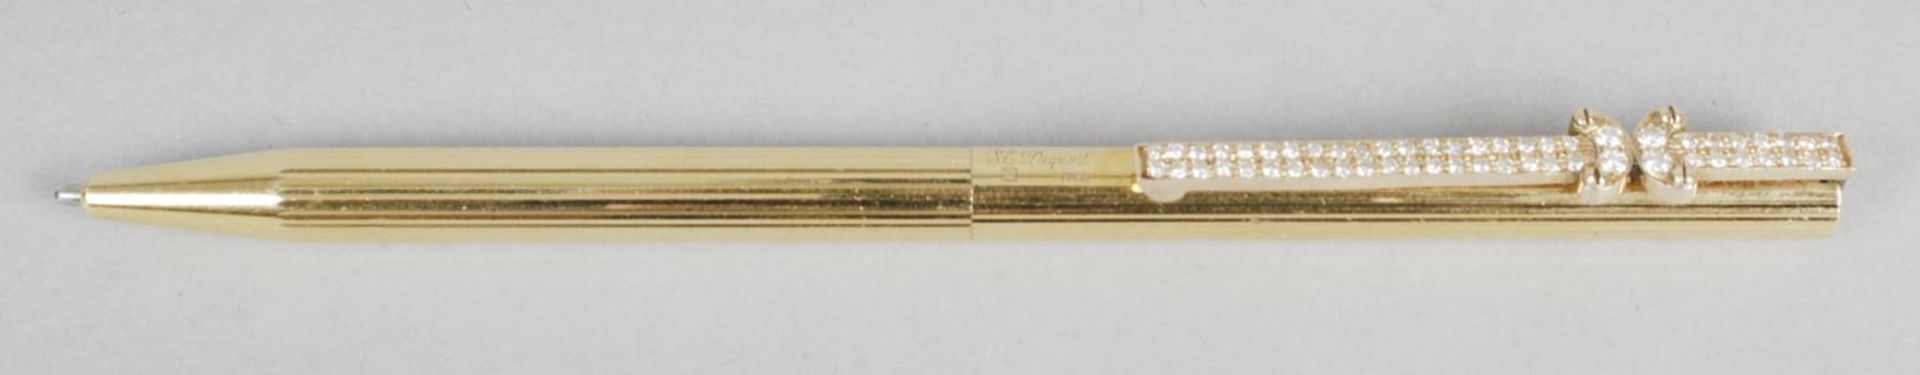 An S.T. Dupont gold plated propelling ball point pen,